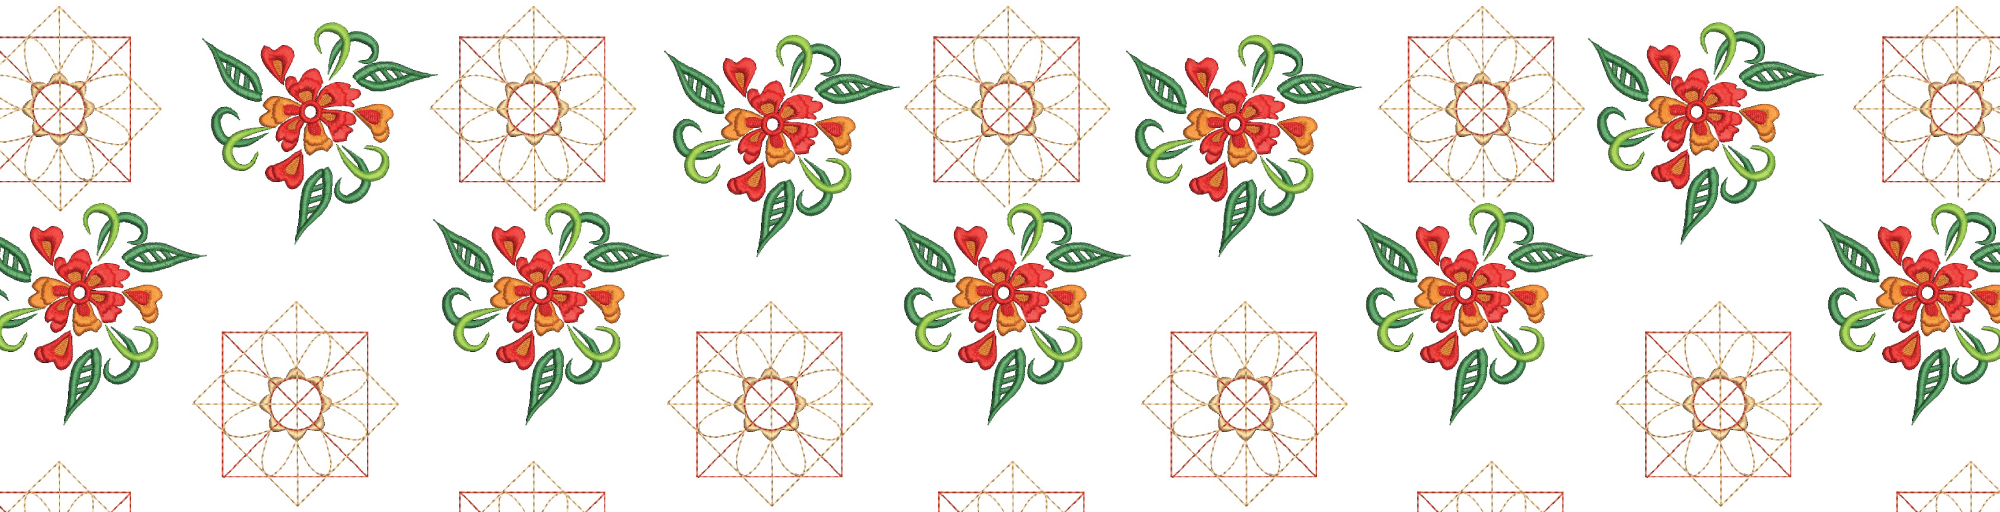 free embroidery designs to download free